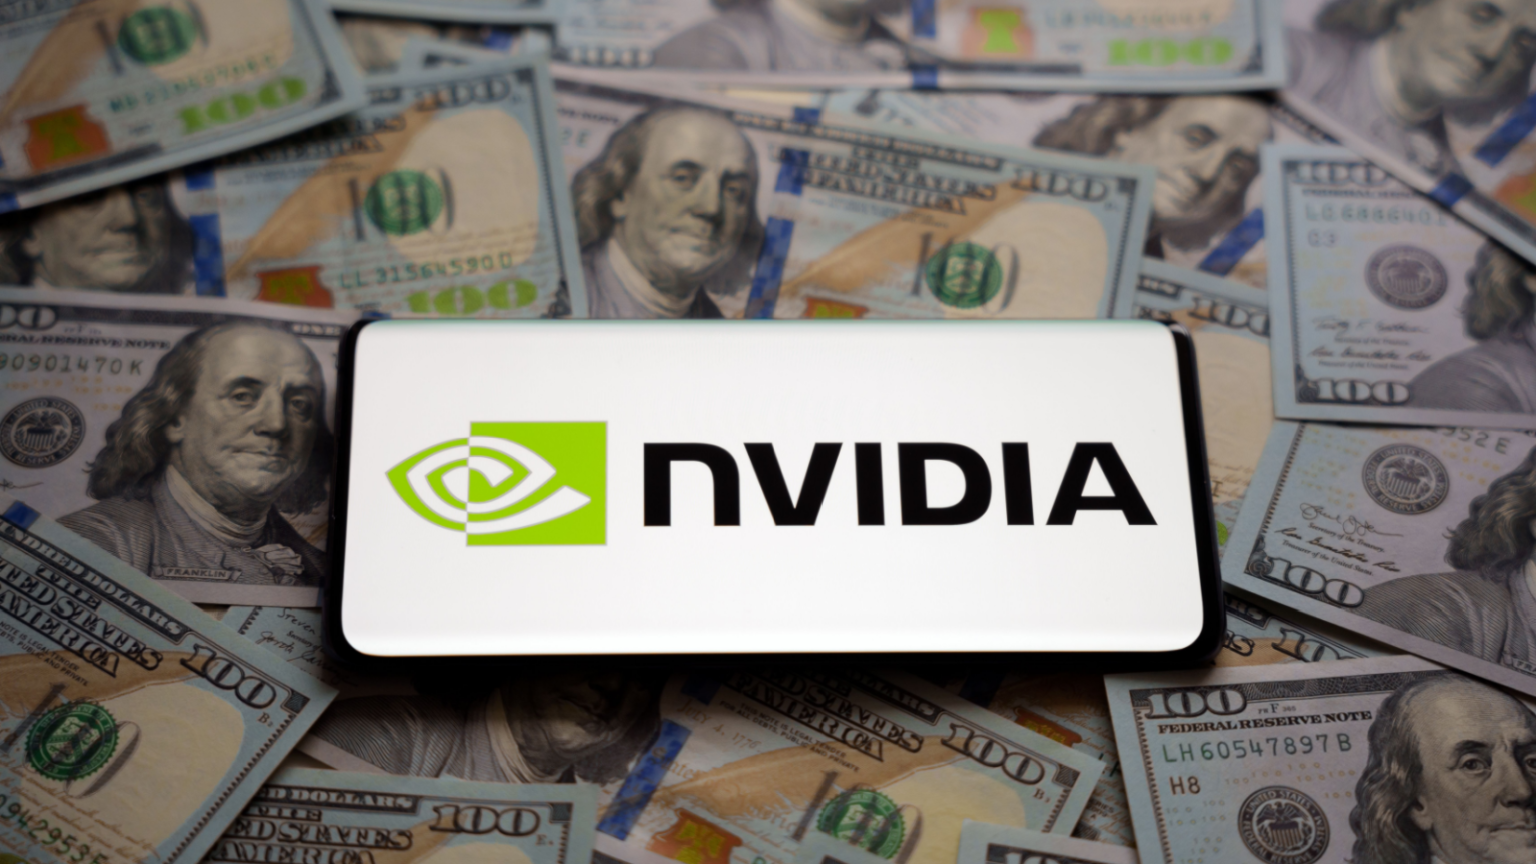 Nvidia Stock Just Set a New Record High. What's Going On? InvestorPlace